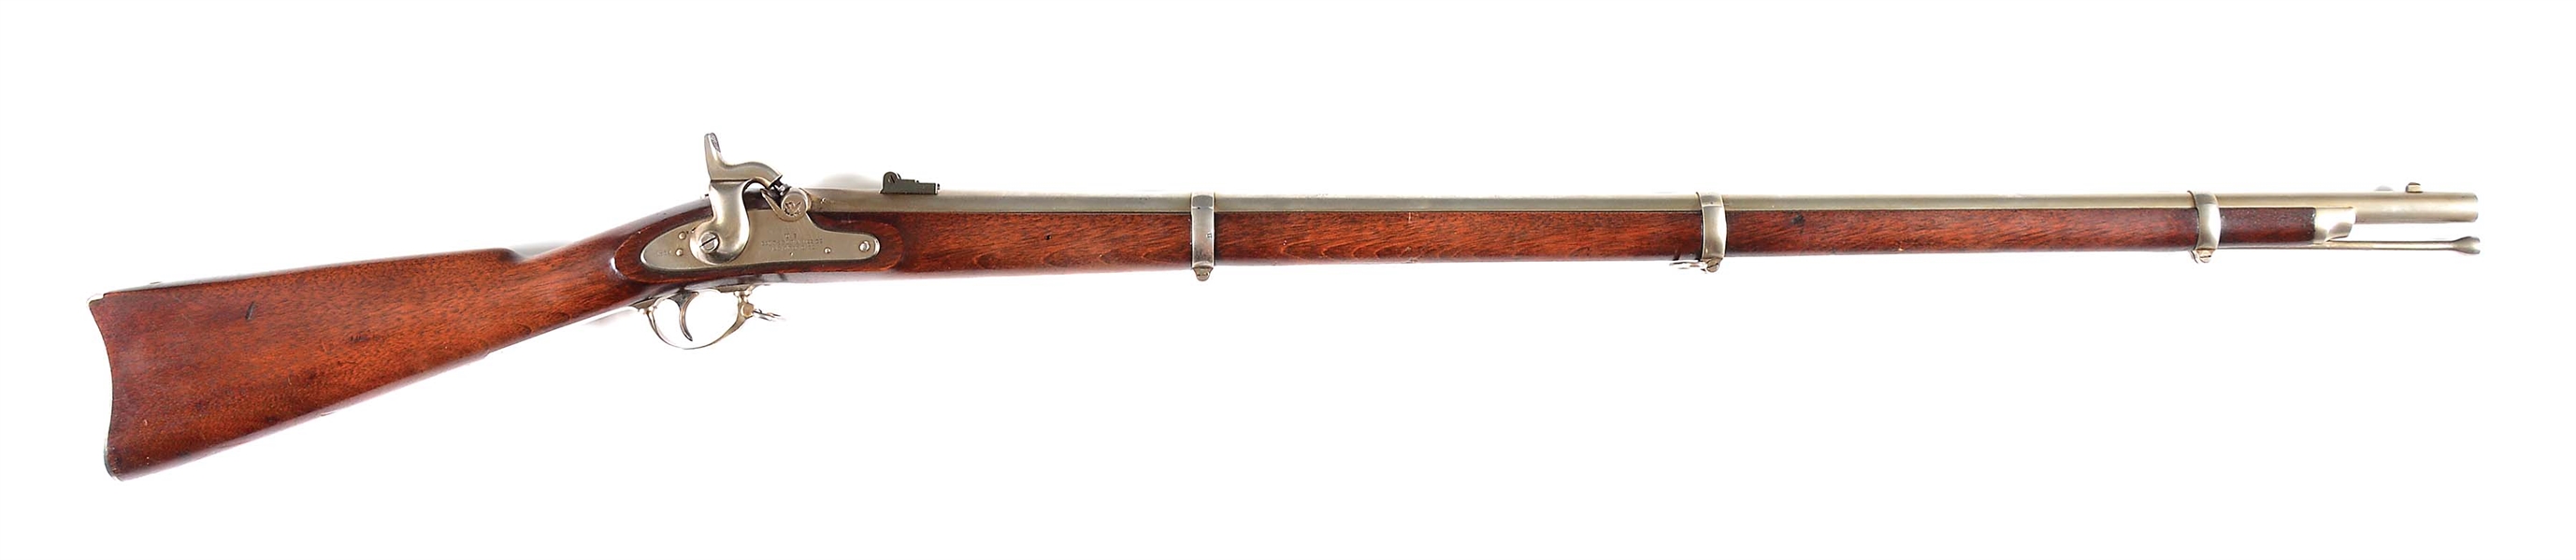 (A) COLT 1861 SPECIAL PERCUSSION RIFLED MUSKET DATED 1864.